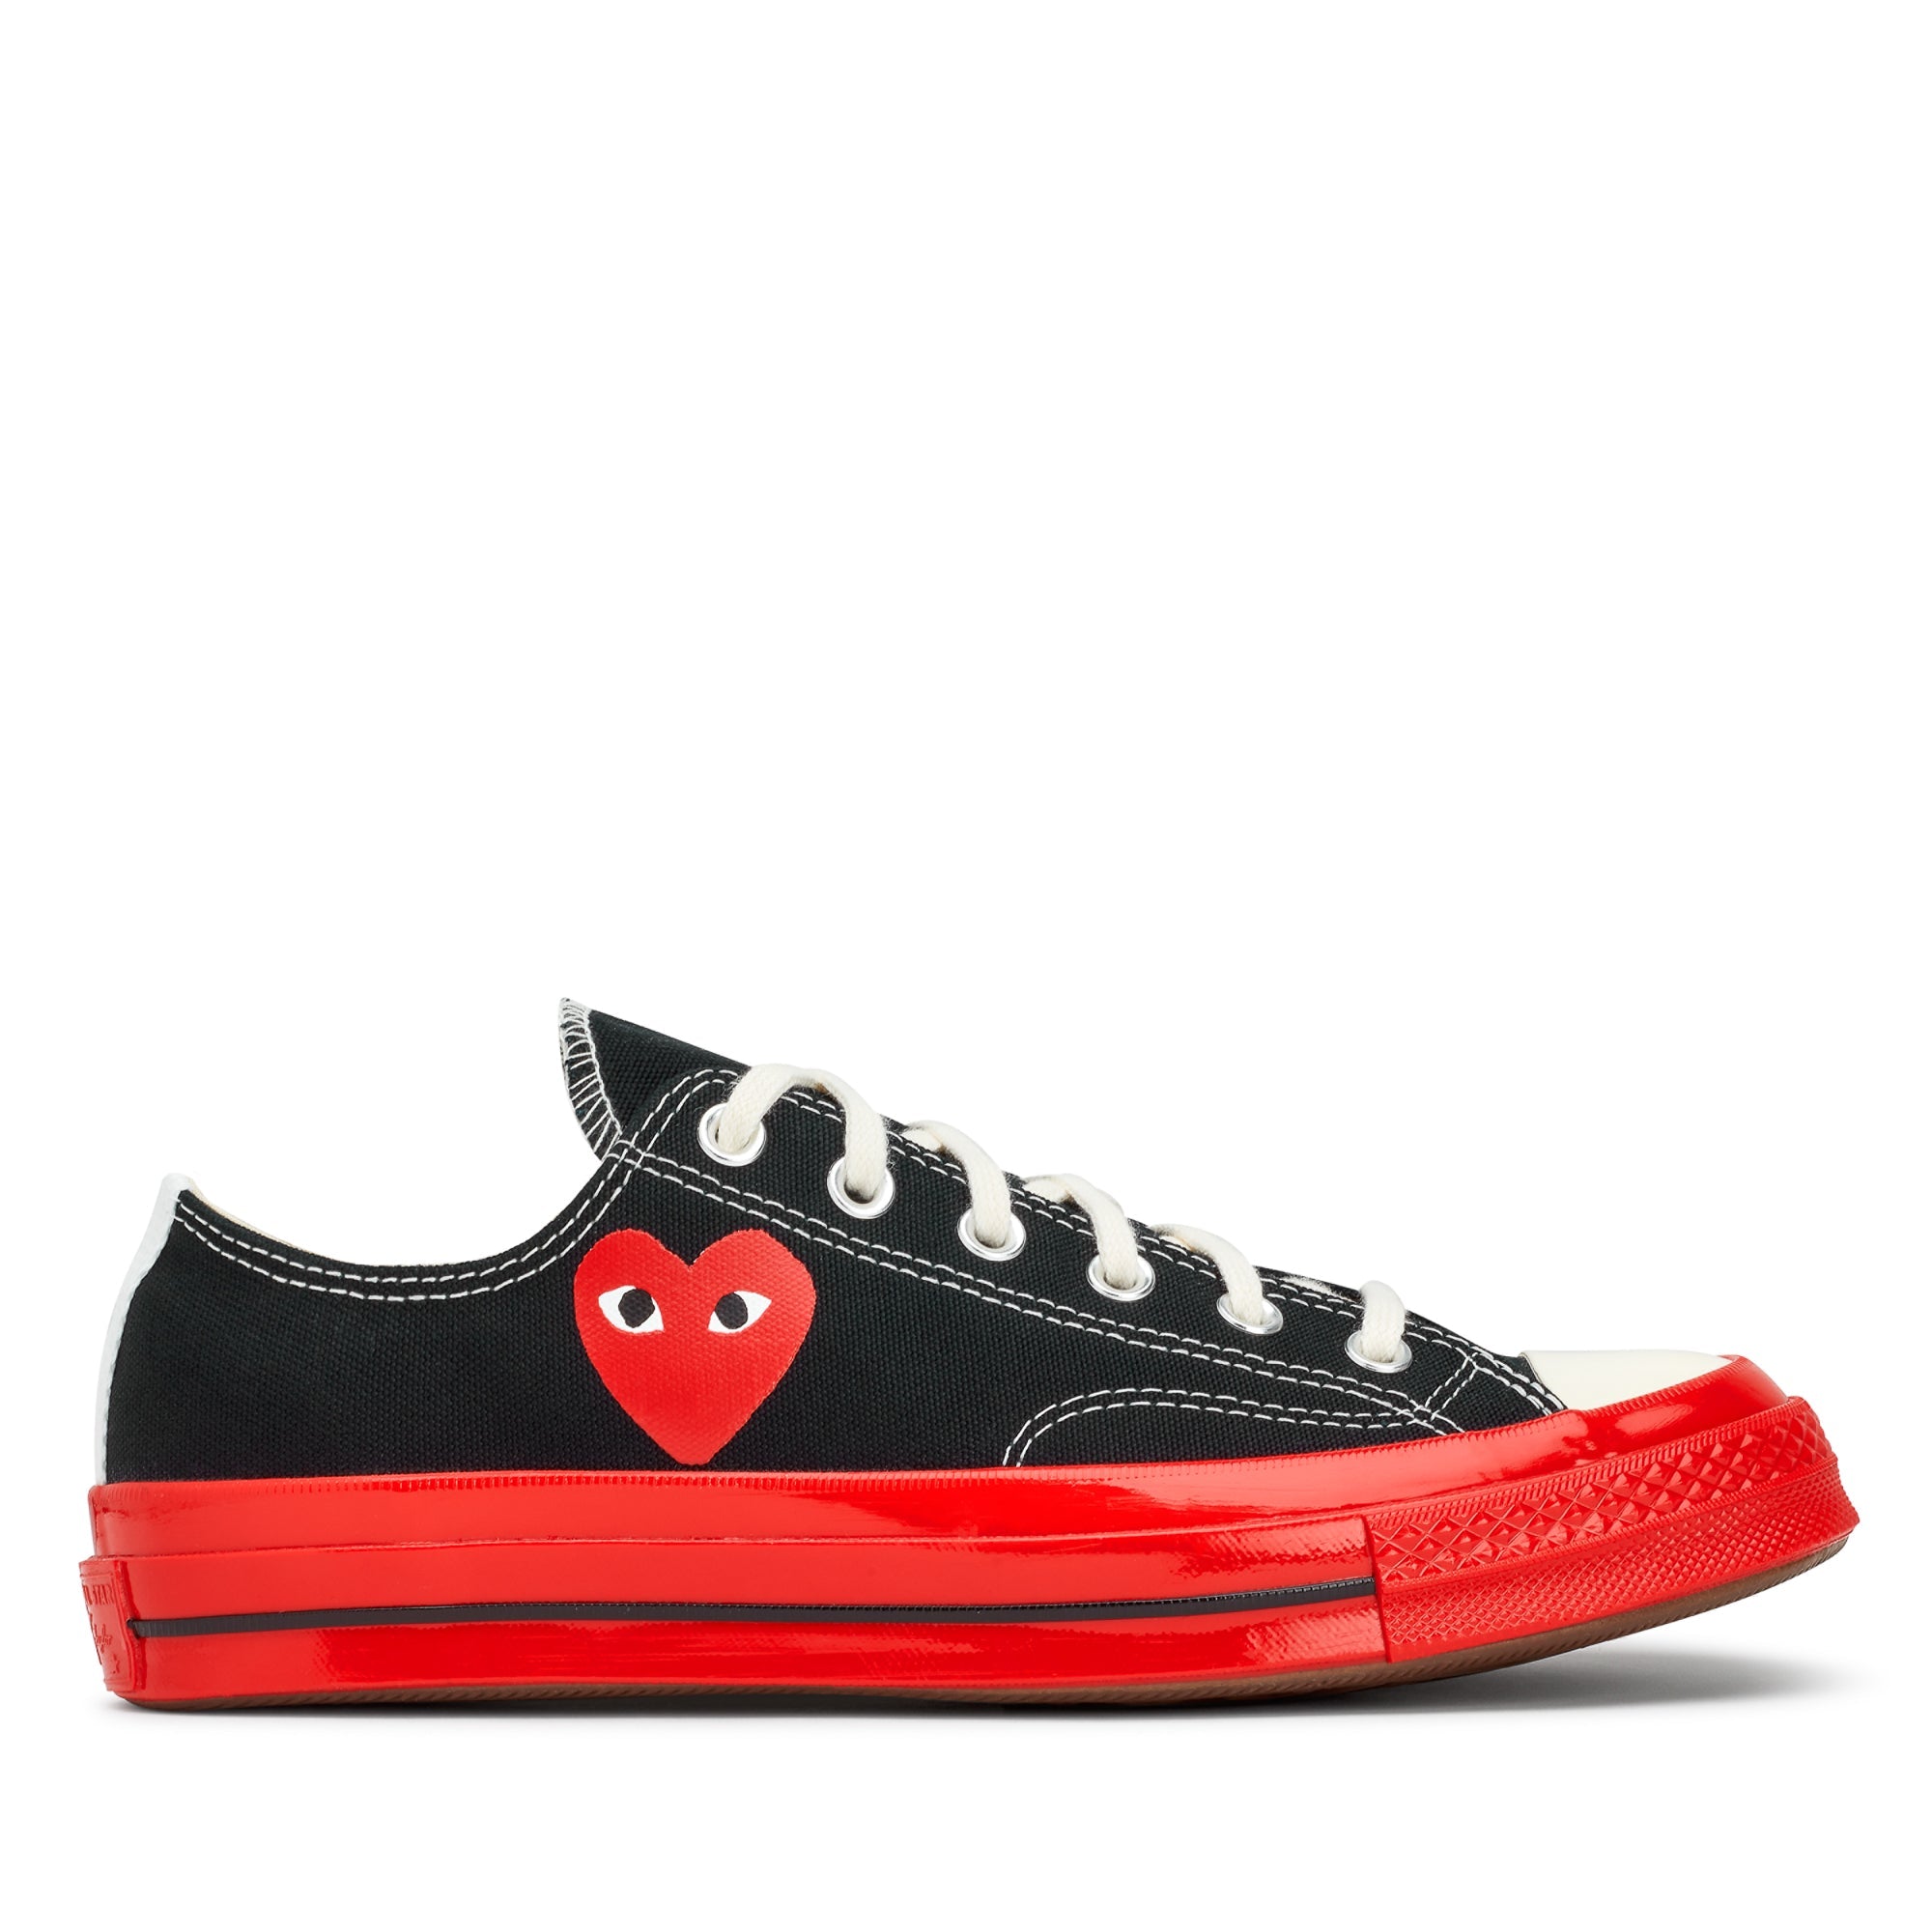 Play Converse - Red Heart & Red Sole 70 Sneakers - – DSMNY E-SHOP